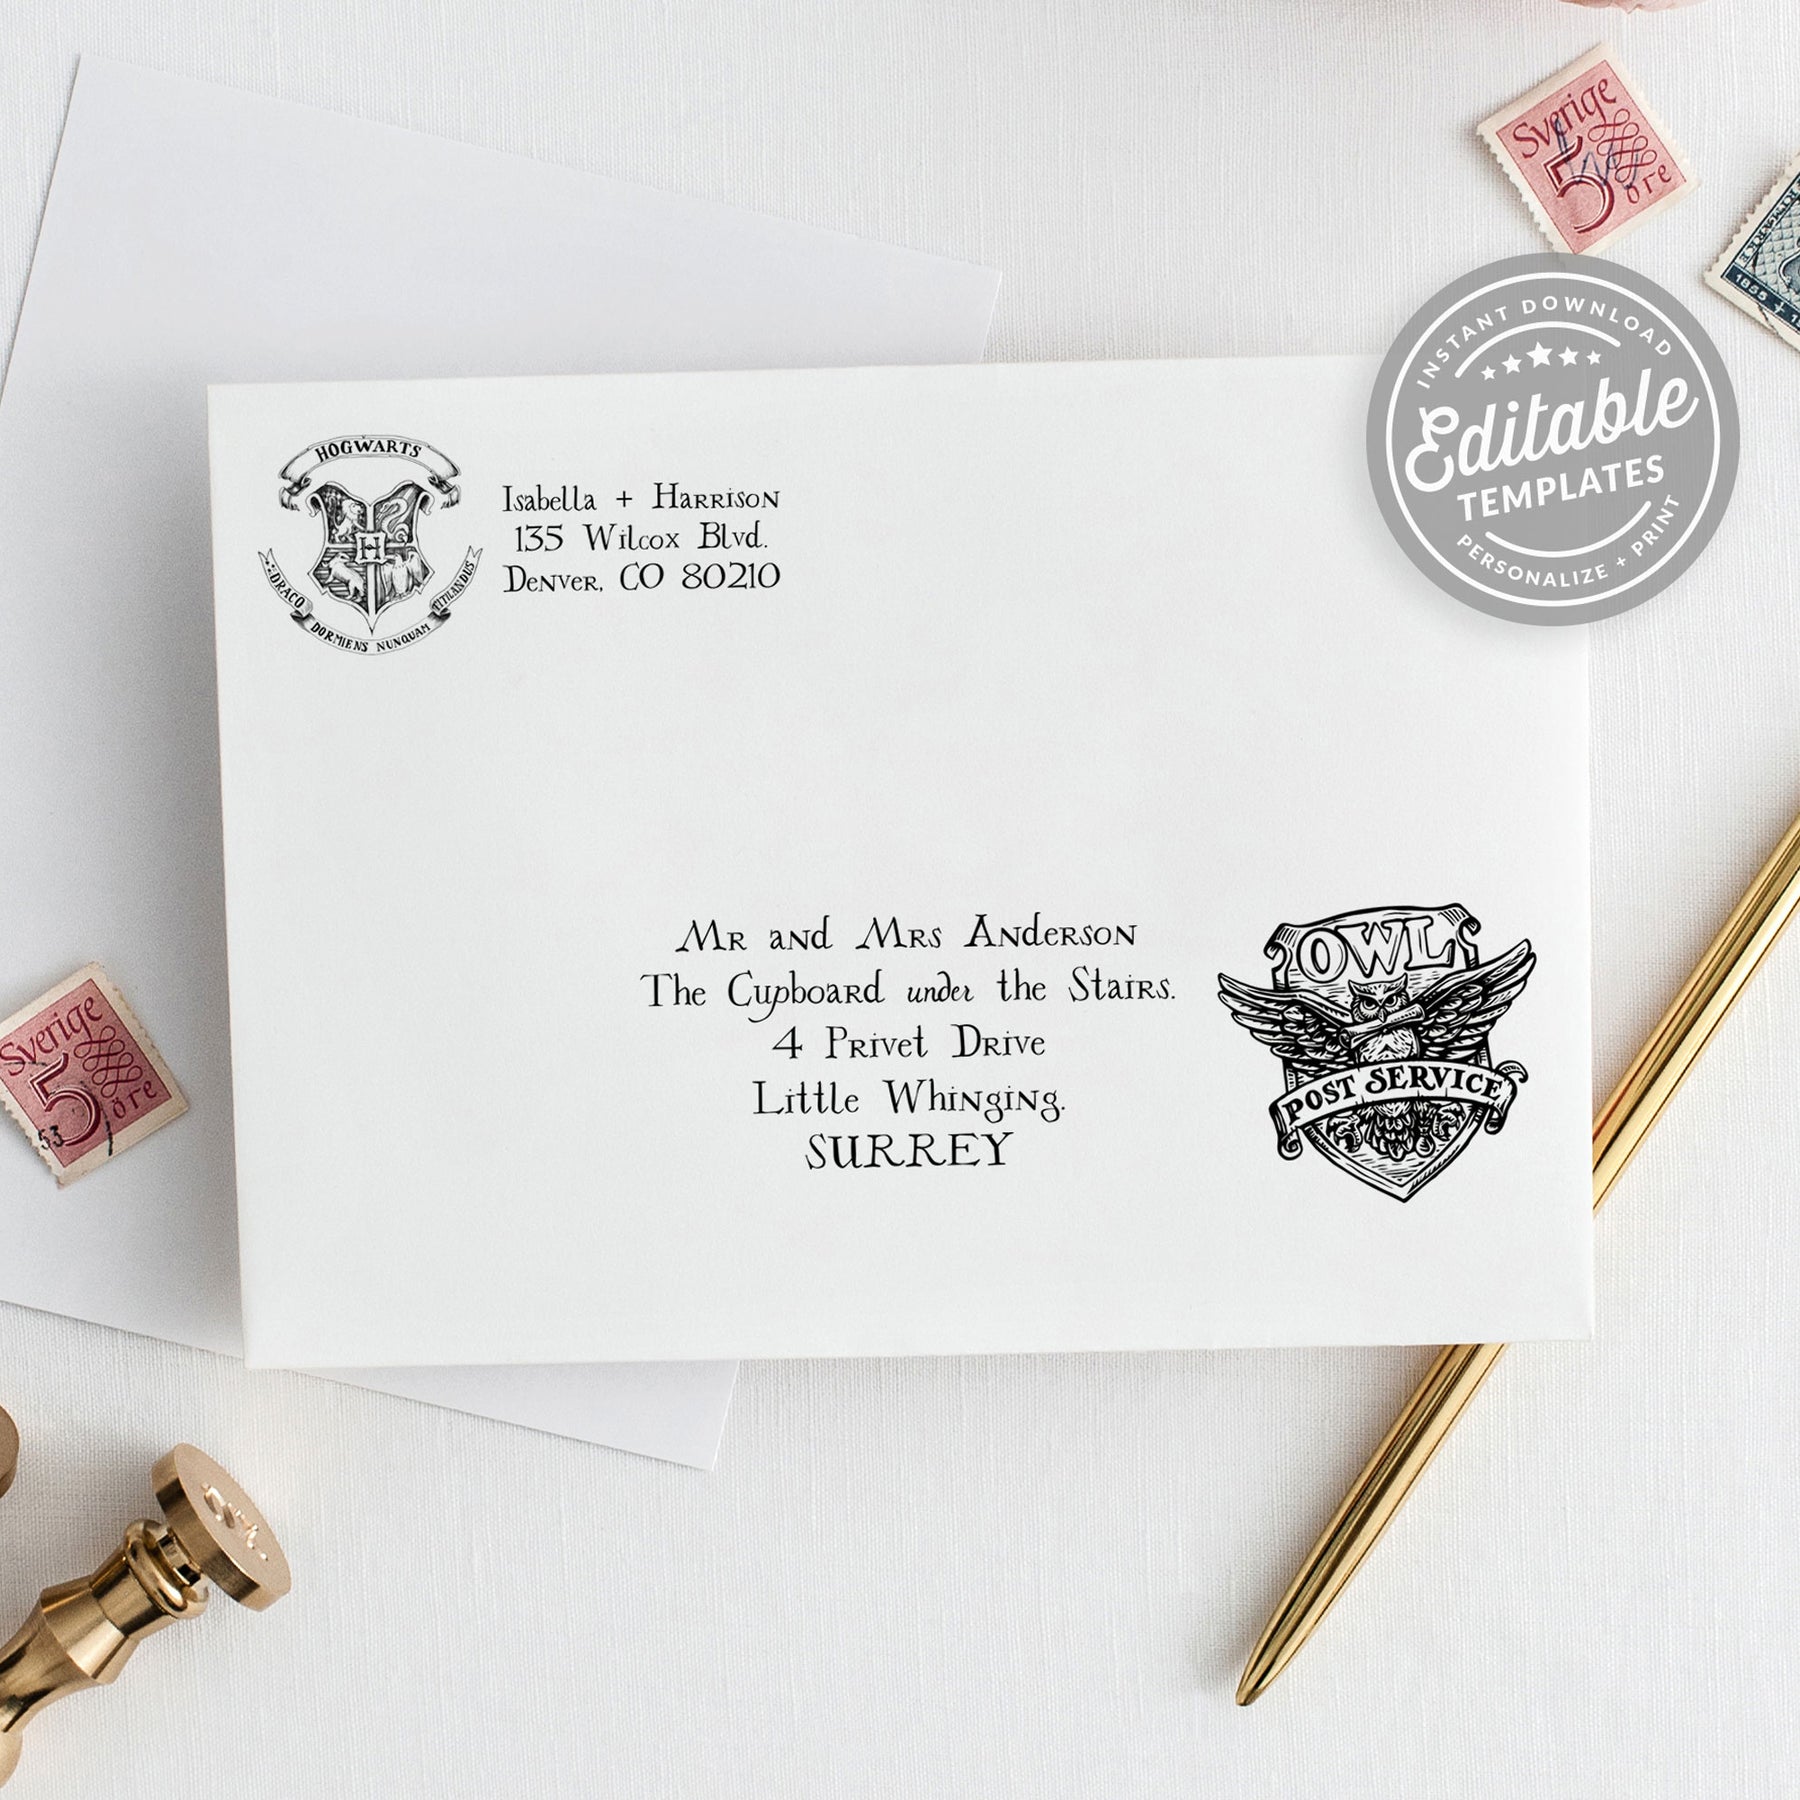 harry potter envelope printable fully editable text magic paperie